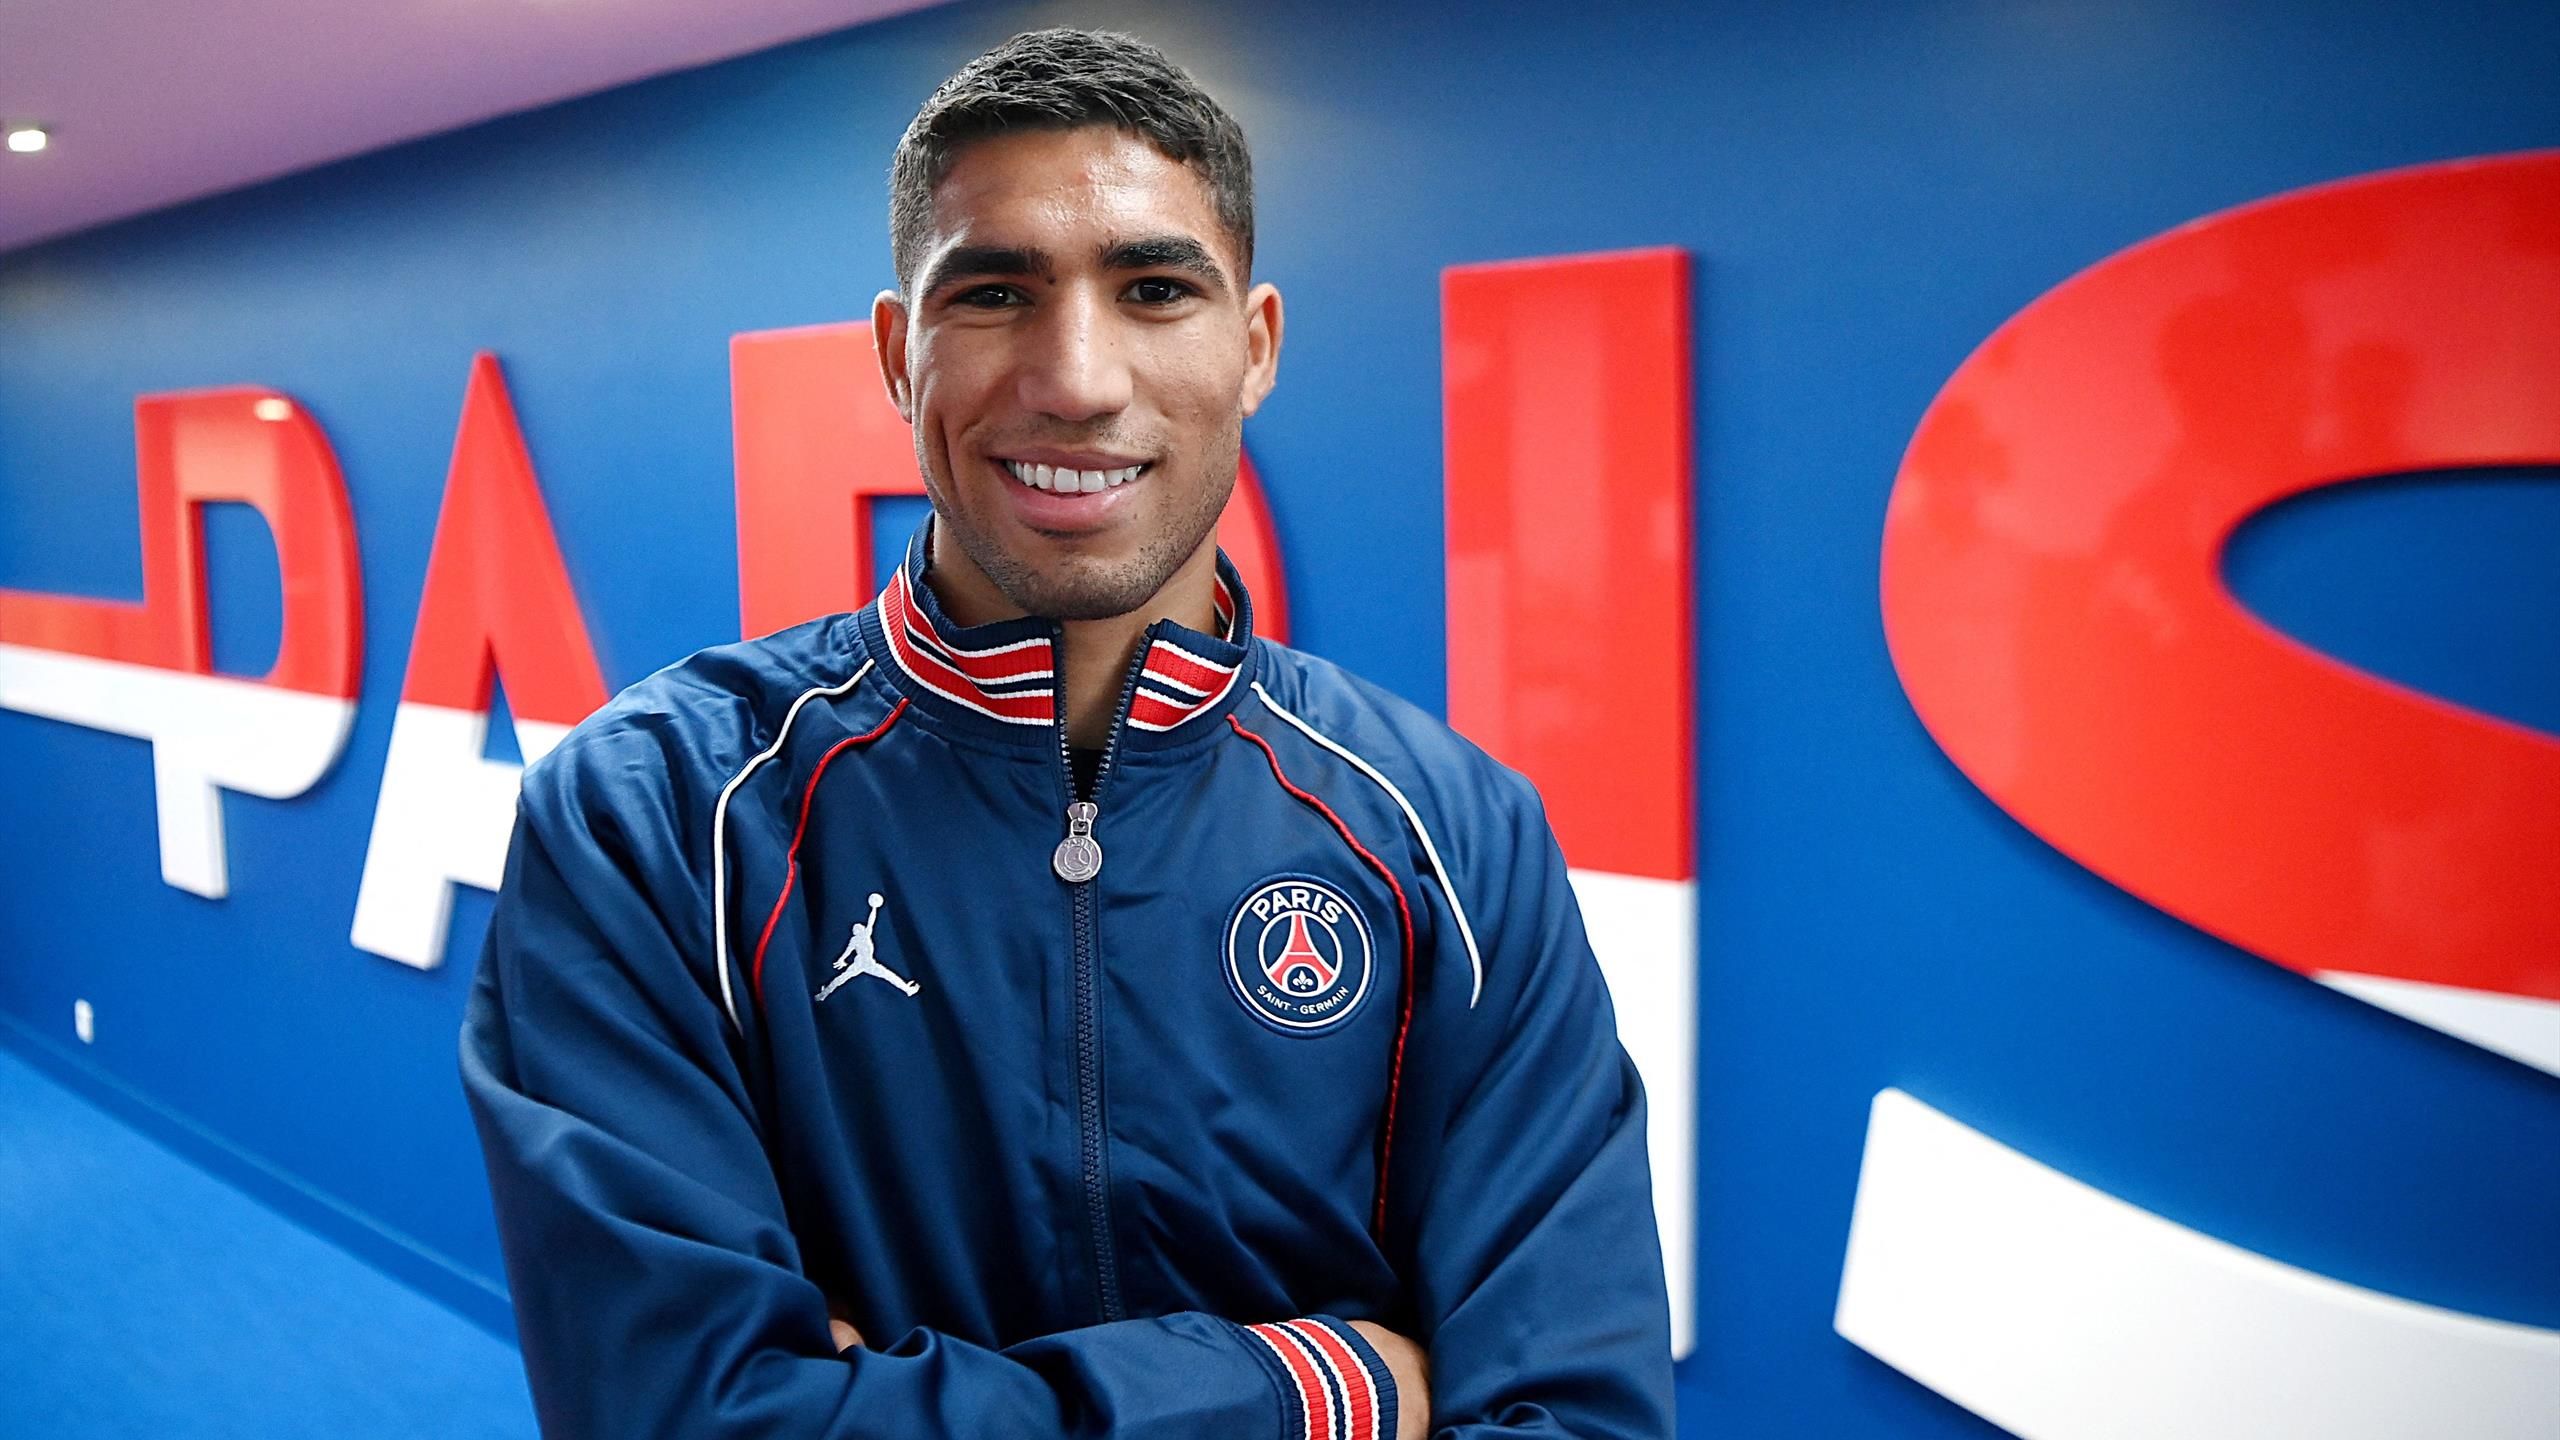 PSG: Achraf Hakimi tested positive for coronavirus and placed in isolation